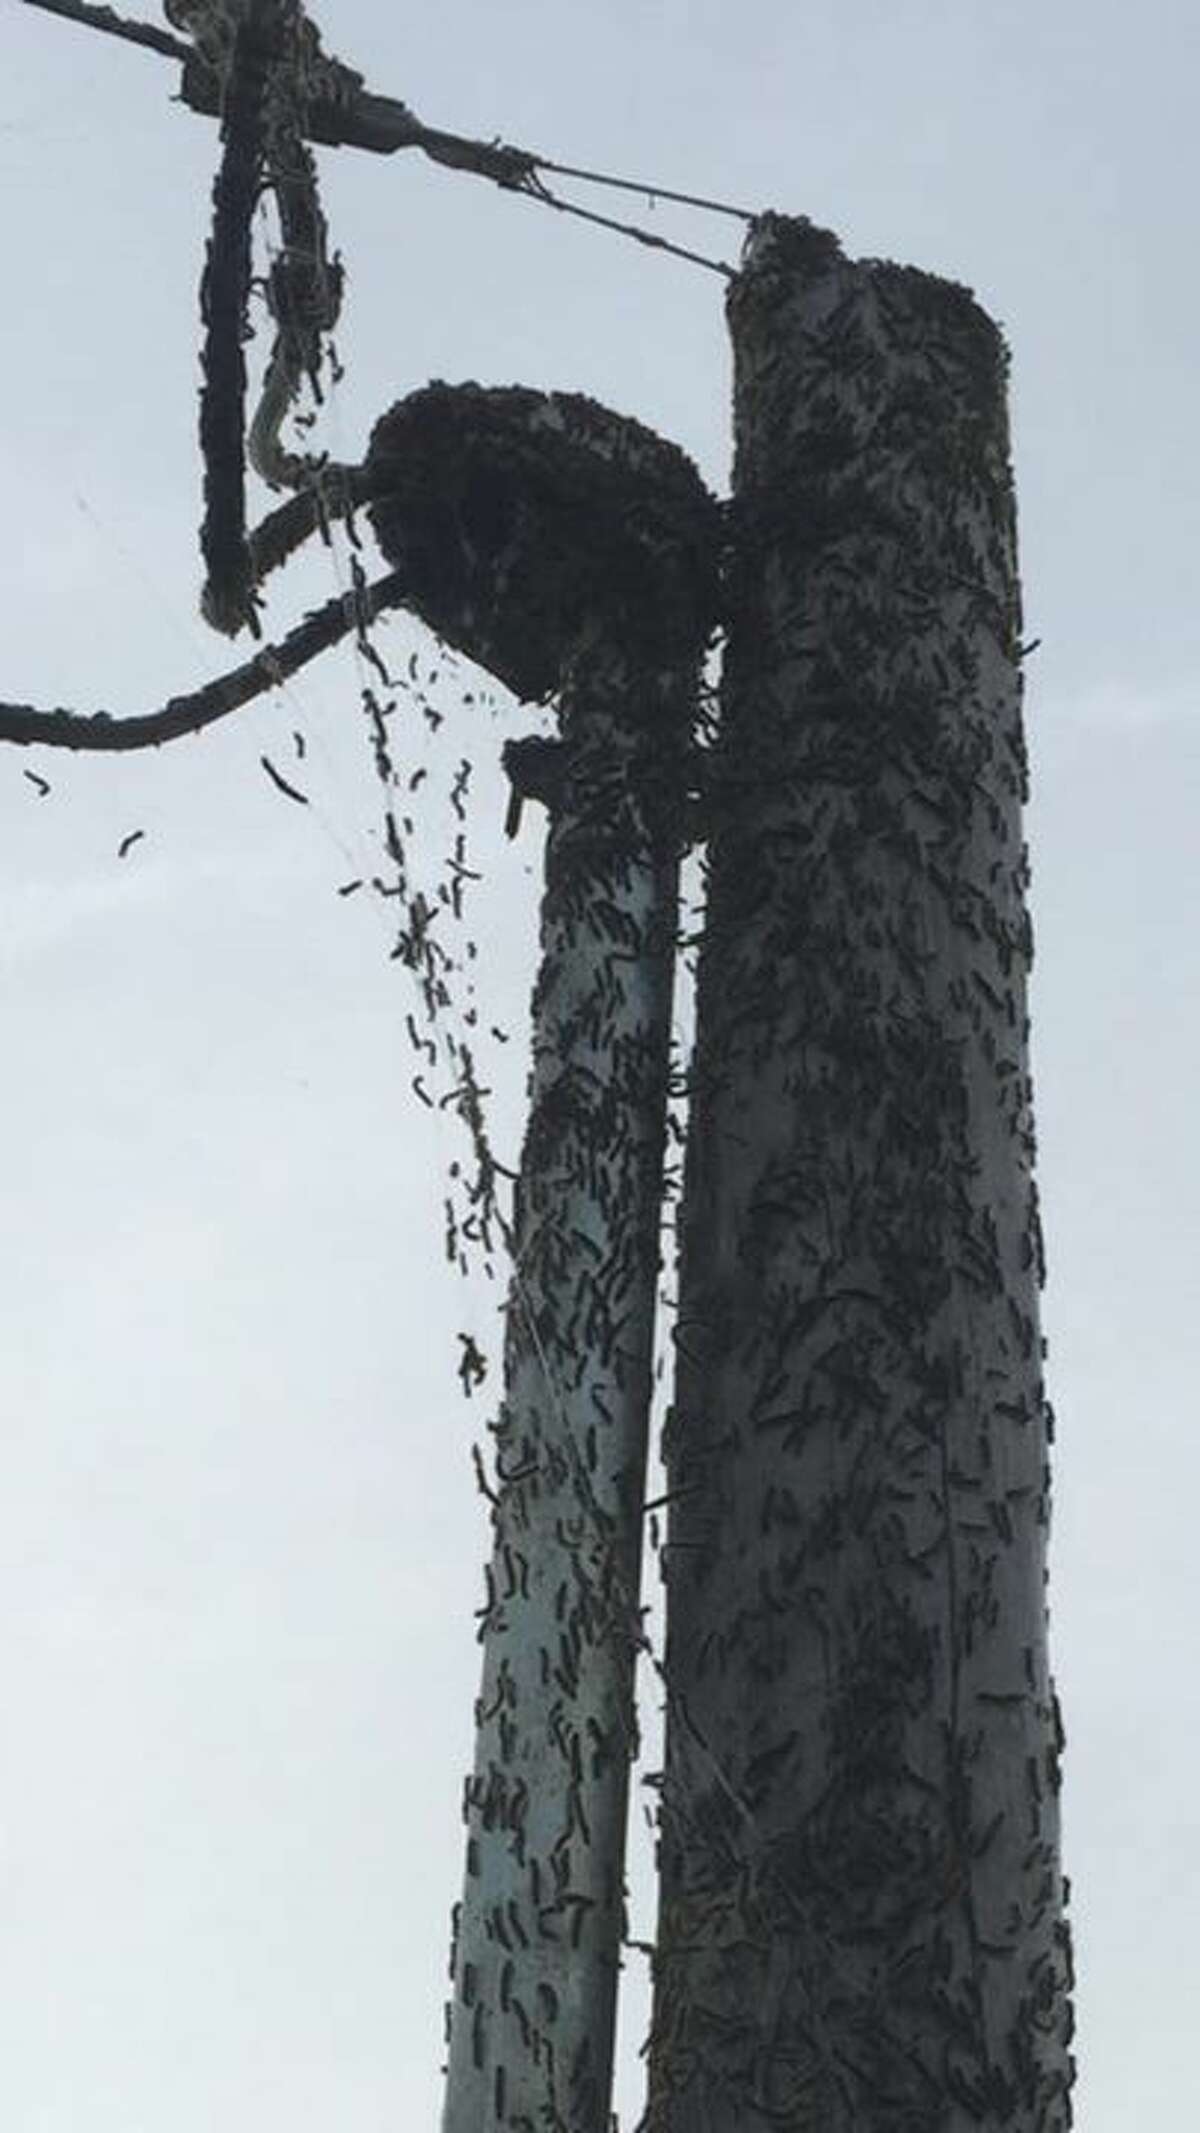 Brook Haynes Murray shared this photo of utility lines that are covered with millions of tent caterpillars.